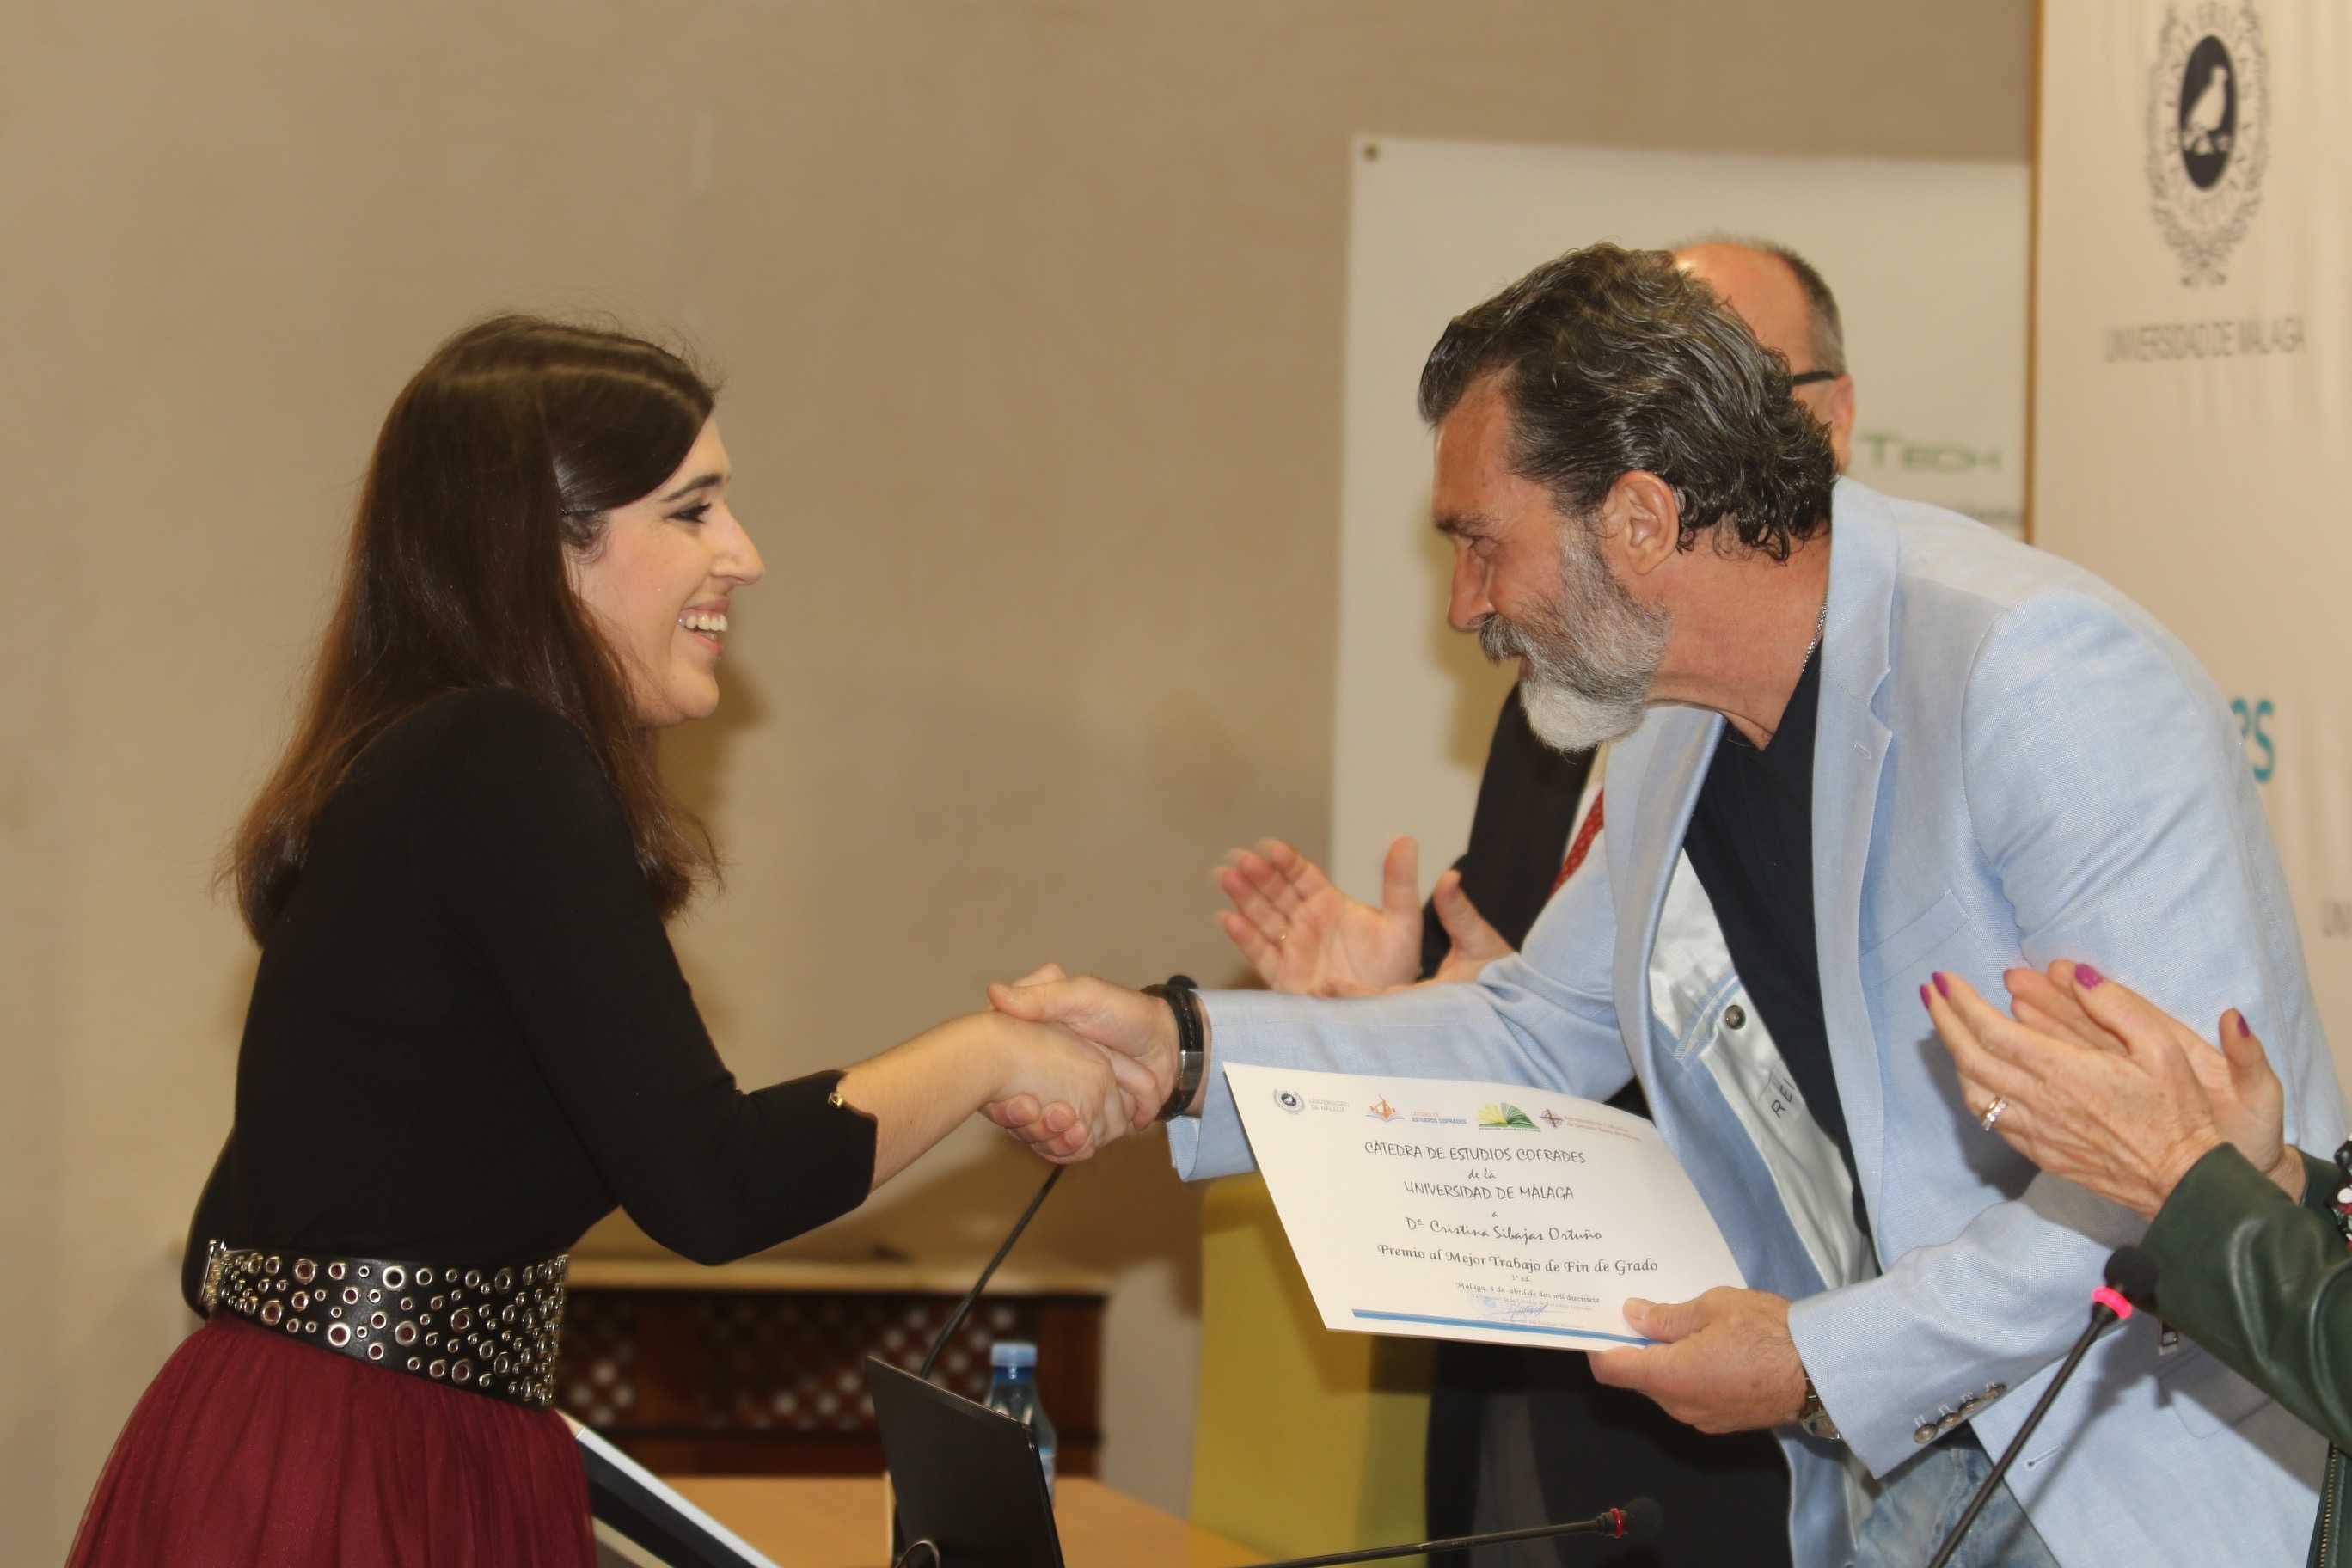 The Malaga actor Antonio Banderas has presented the first Research Awards to the best doctoral thesis and end-of-degree or career papers convened by the Chair of Studies Cofrades of the University of Malaga that carries his Foundation, the Lagrimas and favors